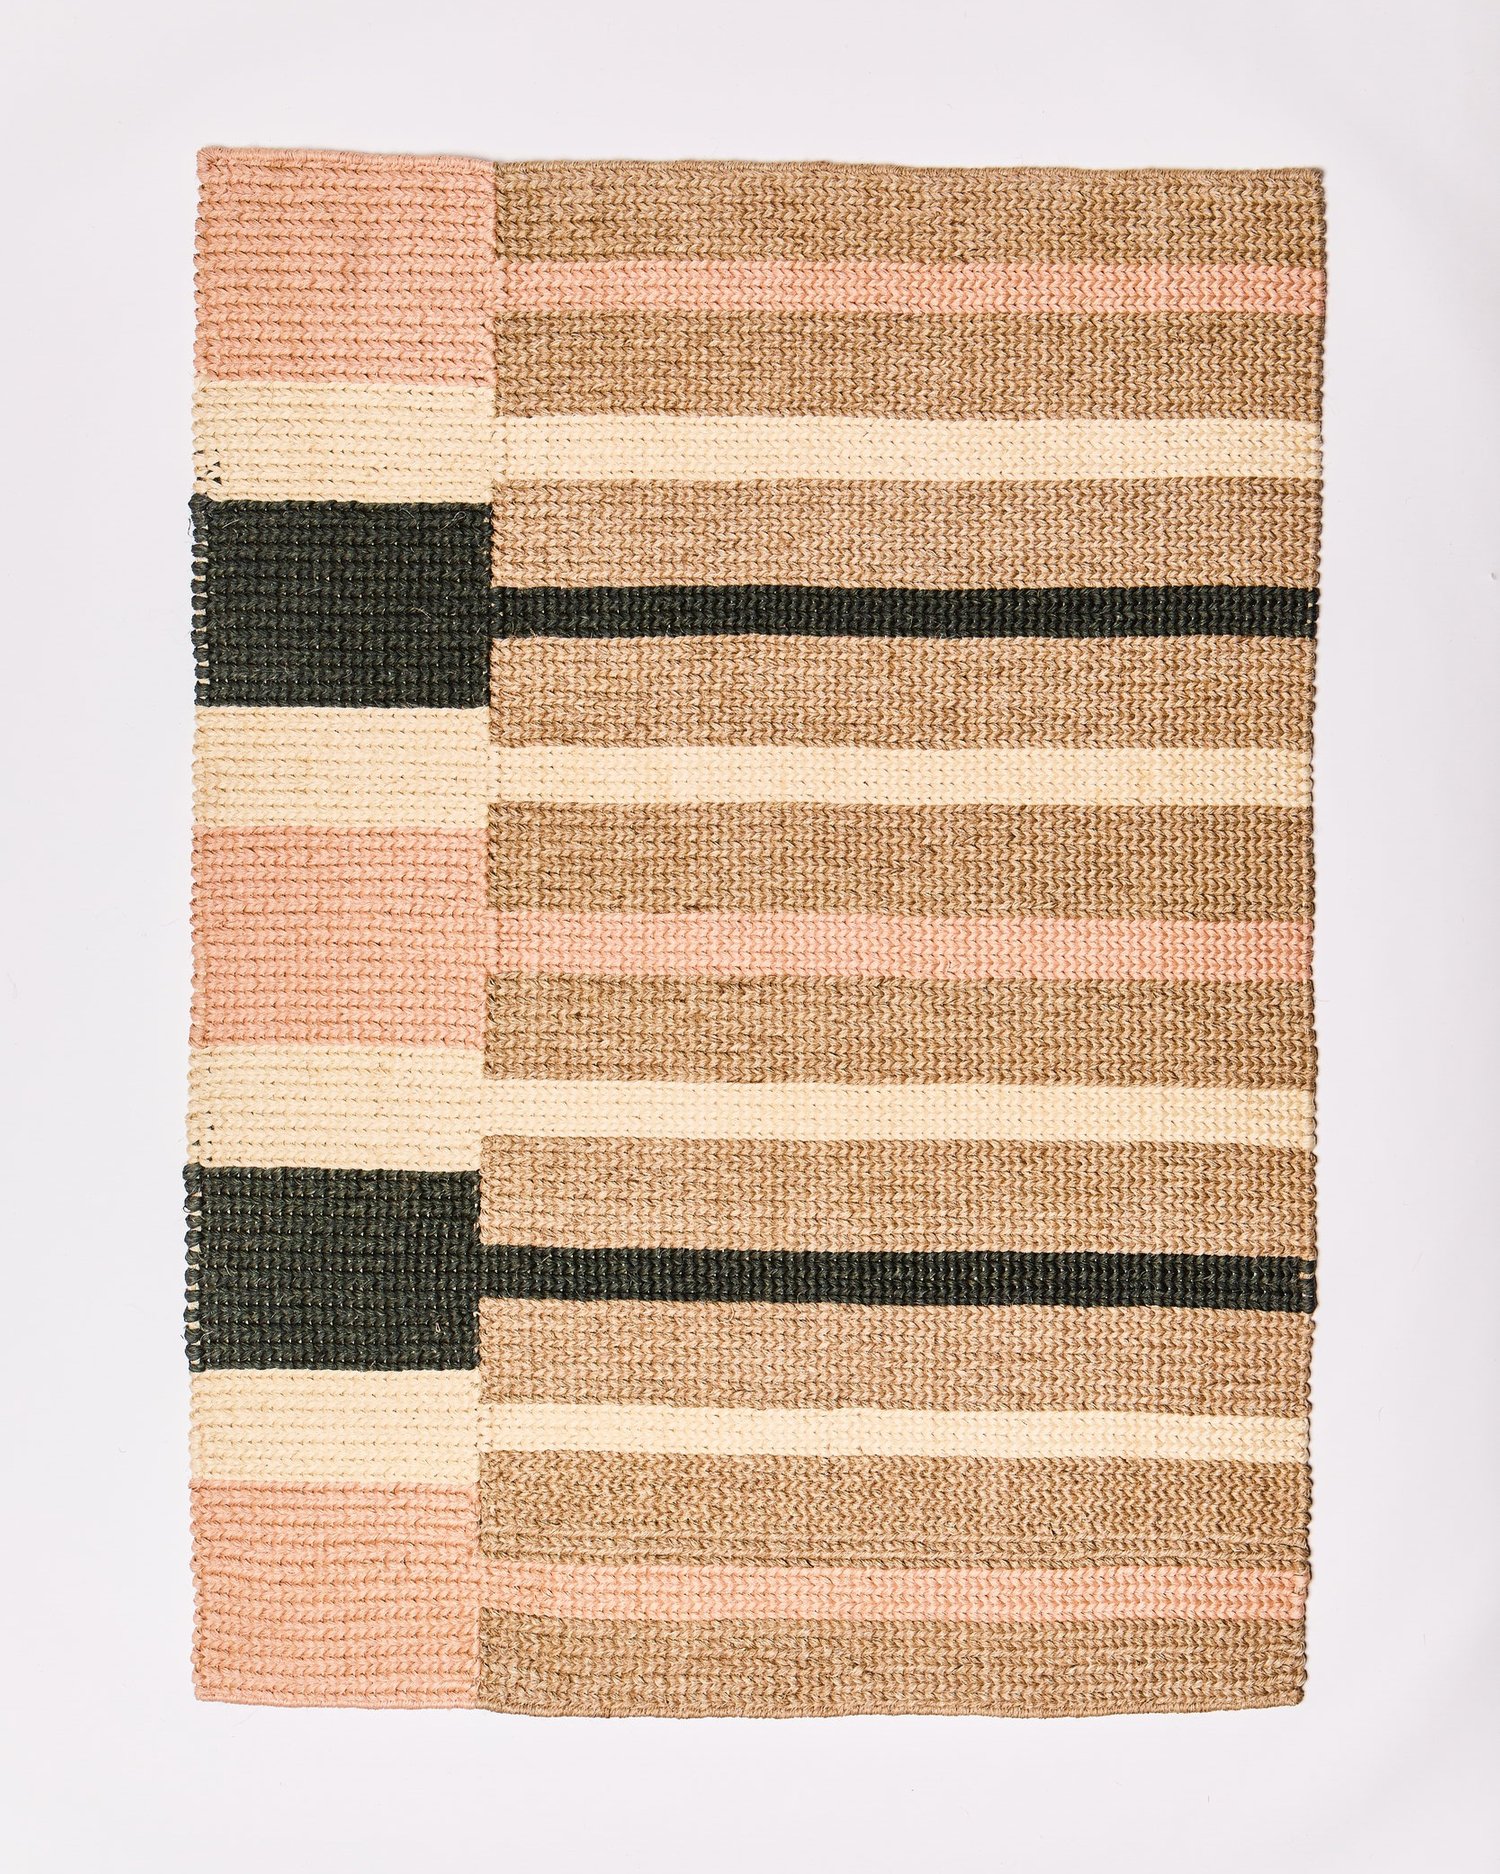 Where To Buy Ethically Made Rugs Online, Fair Trade Rugs